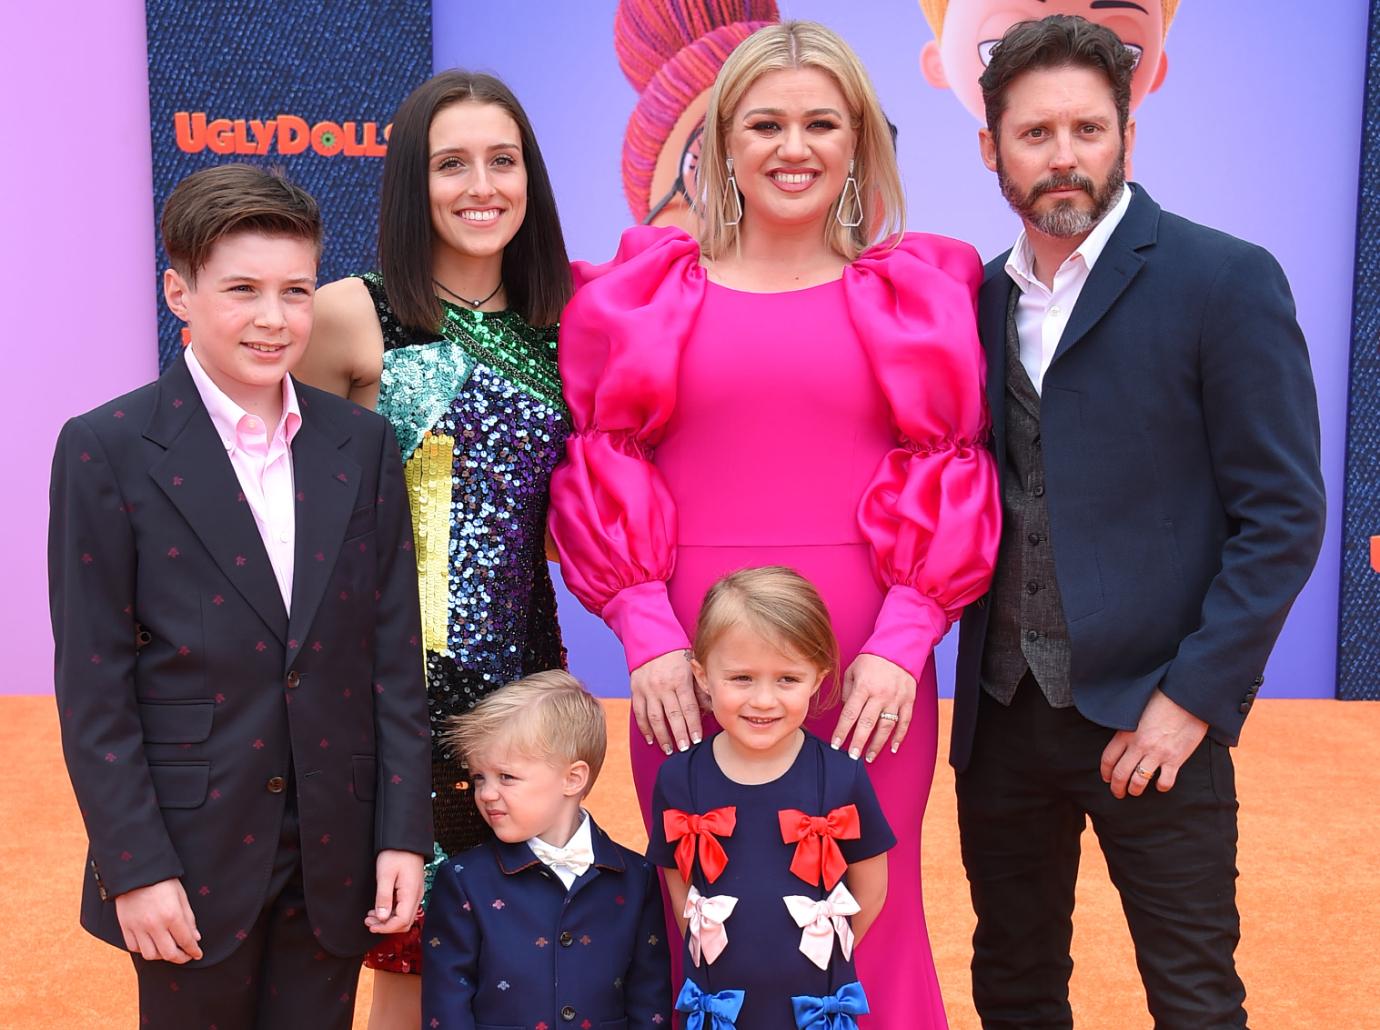 Kelly Clarkson All Smiles At Disney World With Kids Amid Nasty Divorce ...